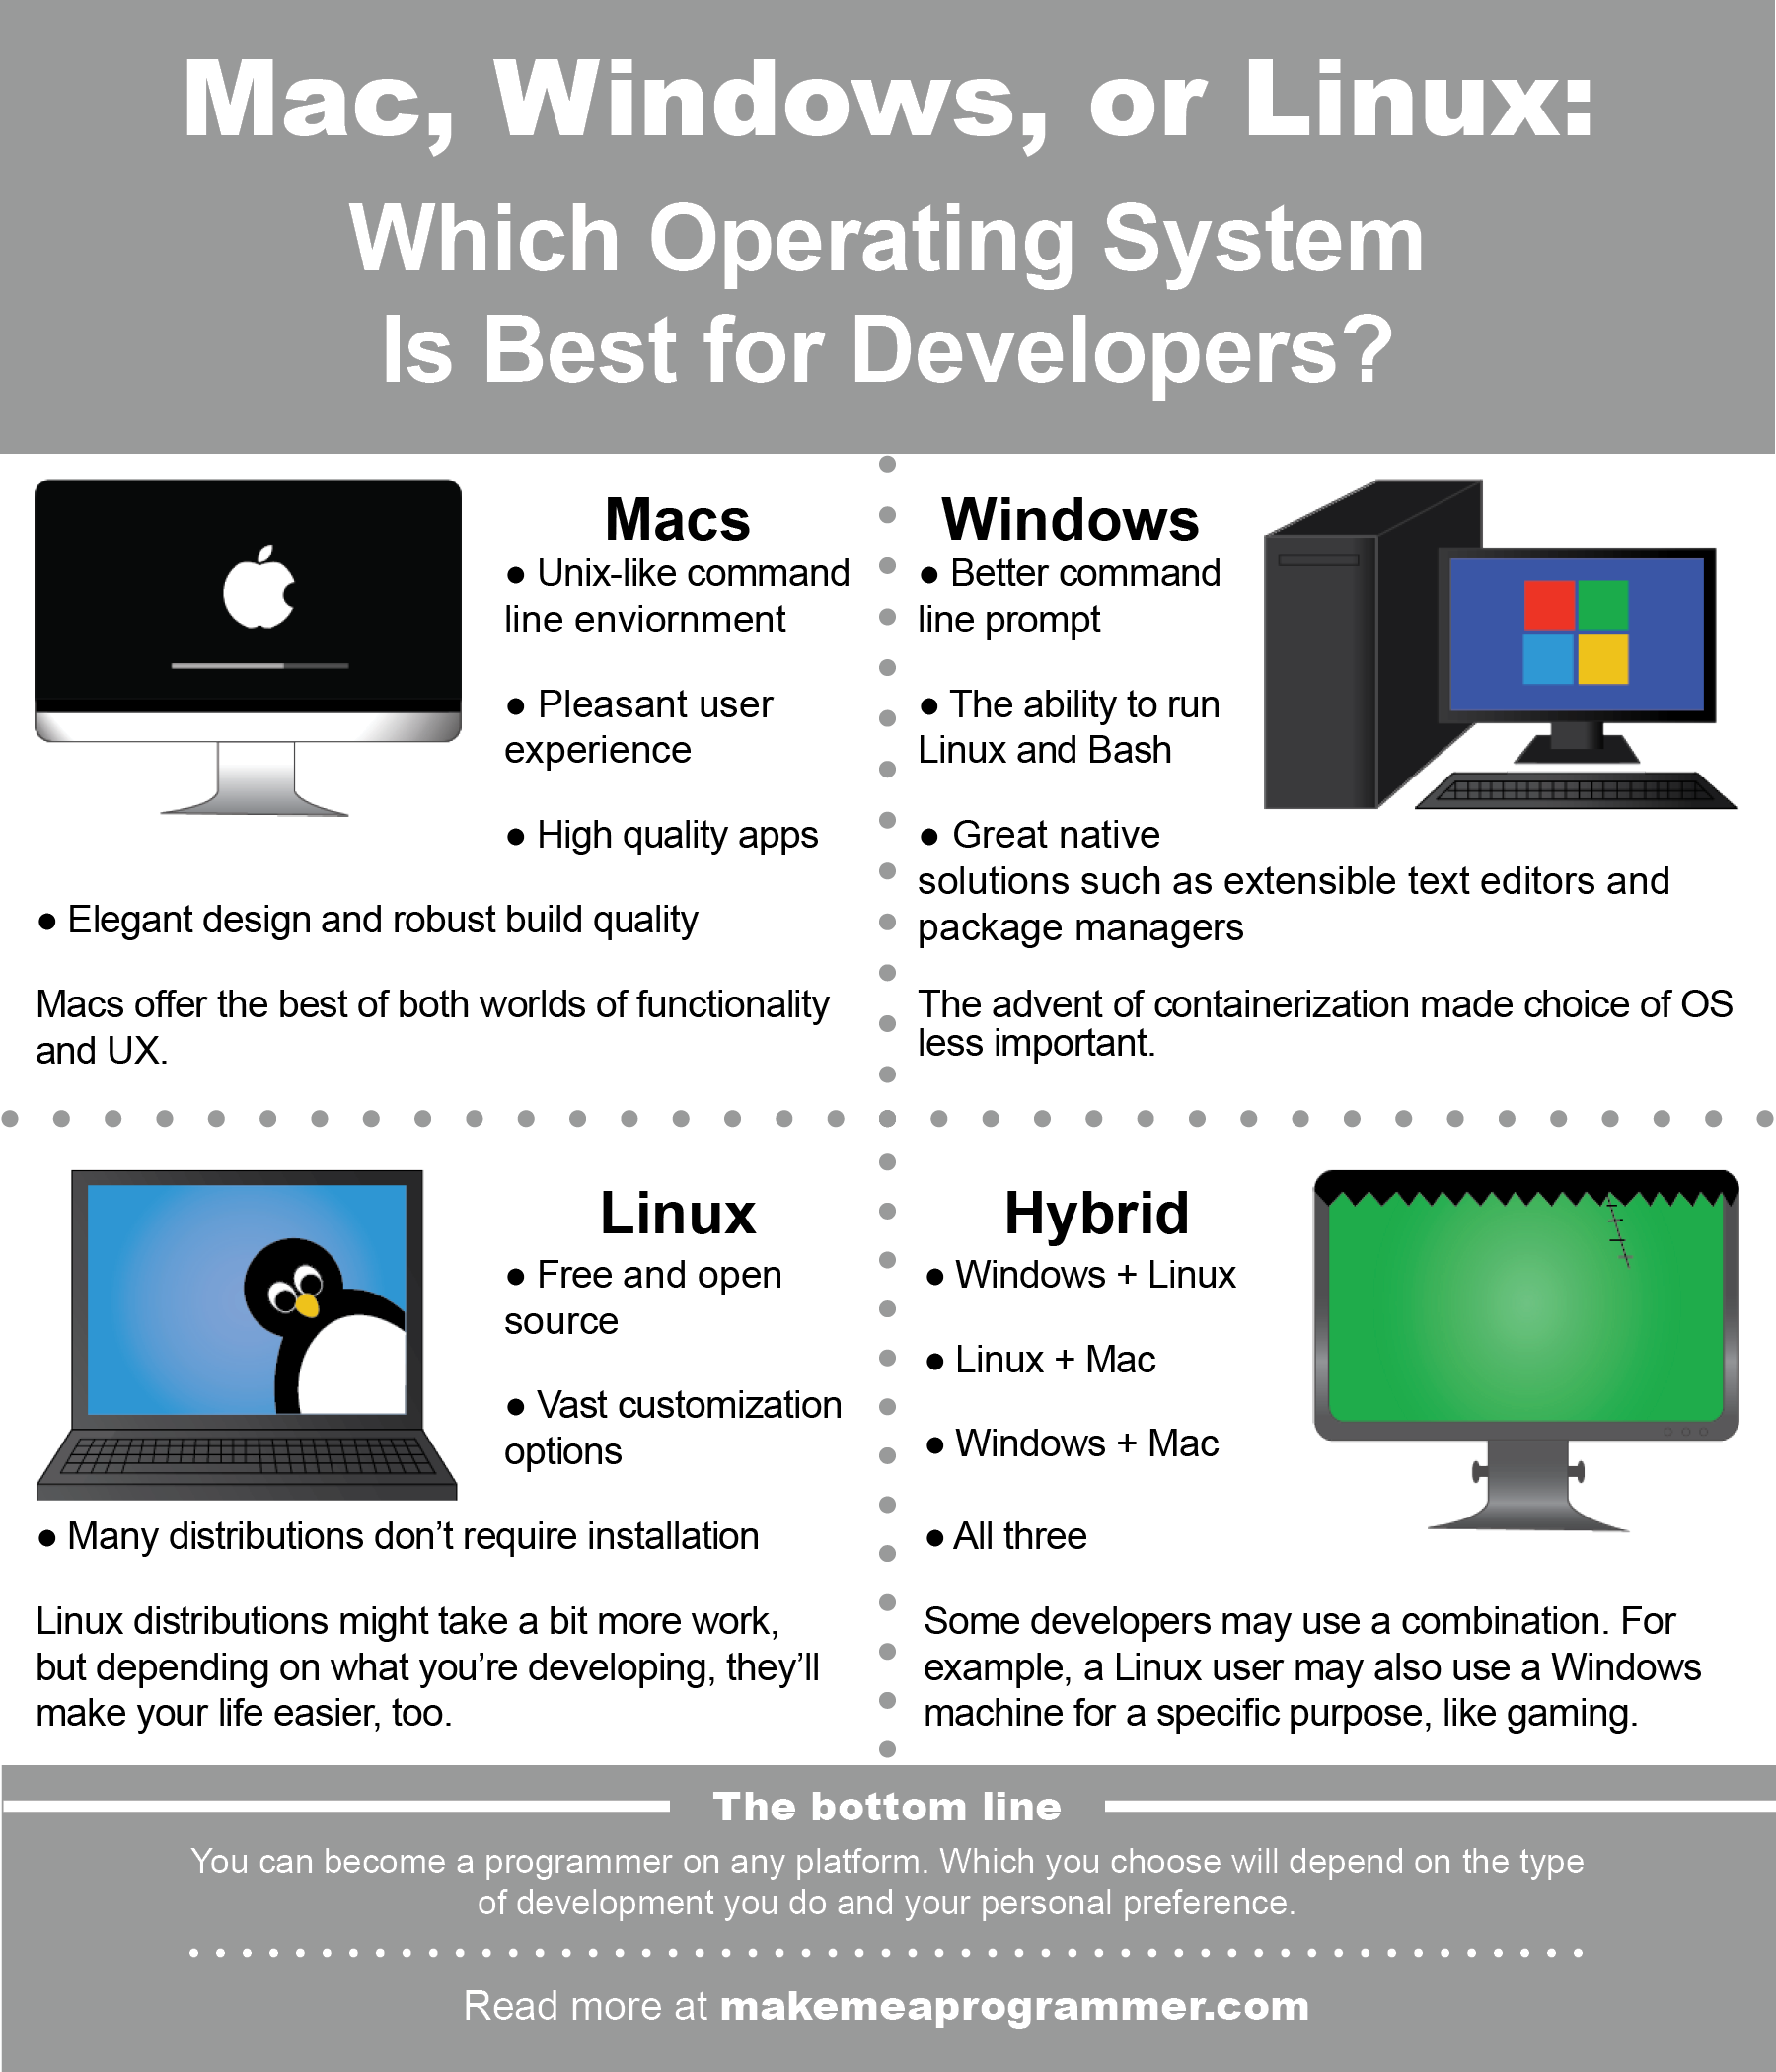 linux windows or mac for small businesses